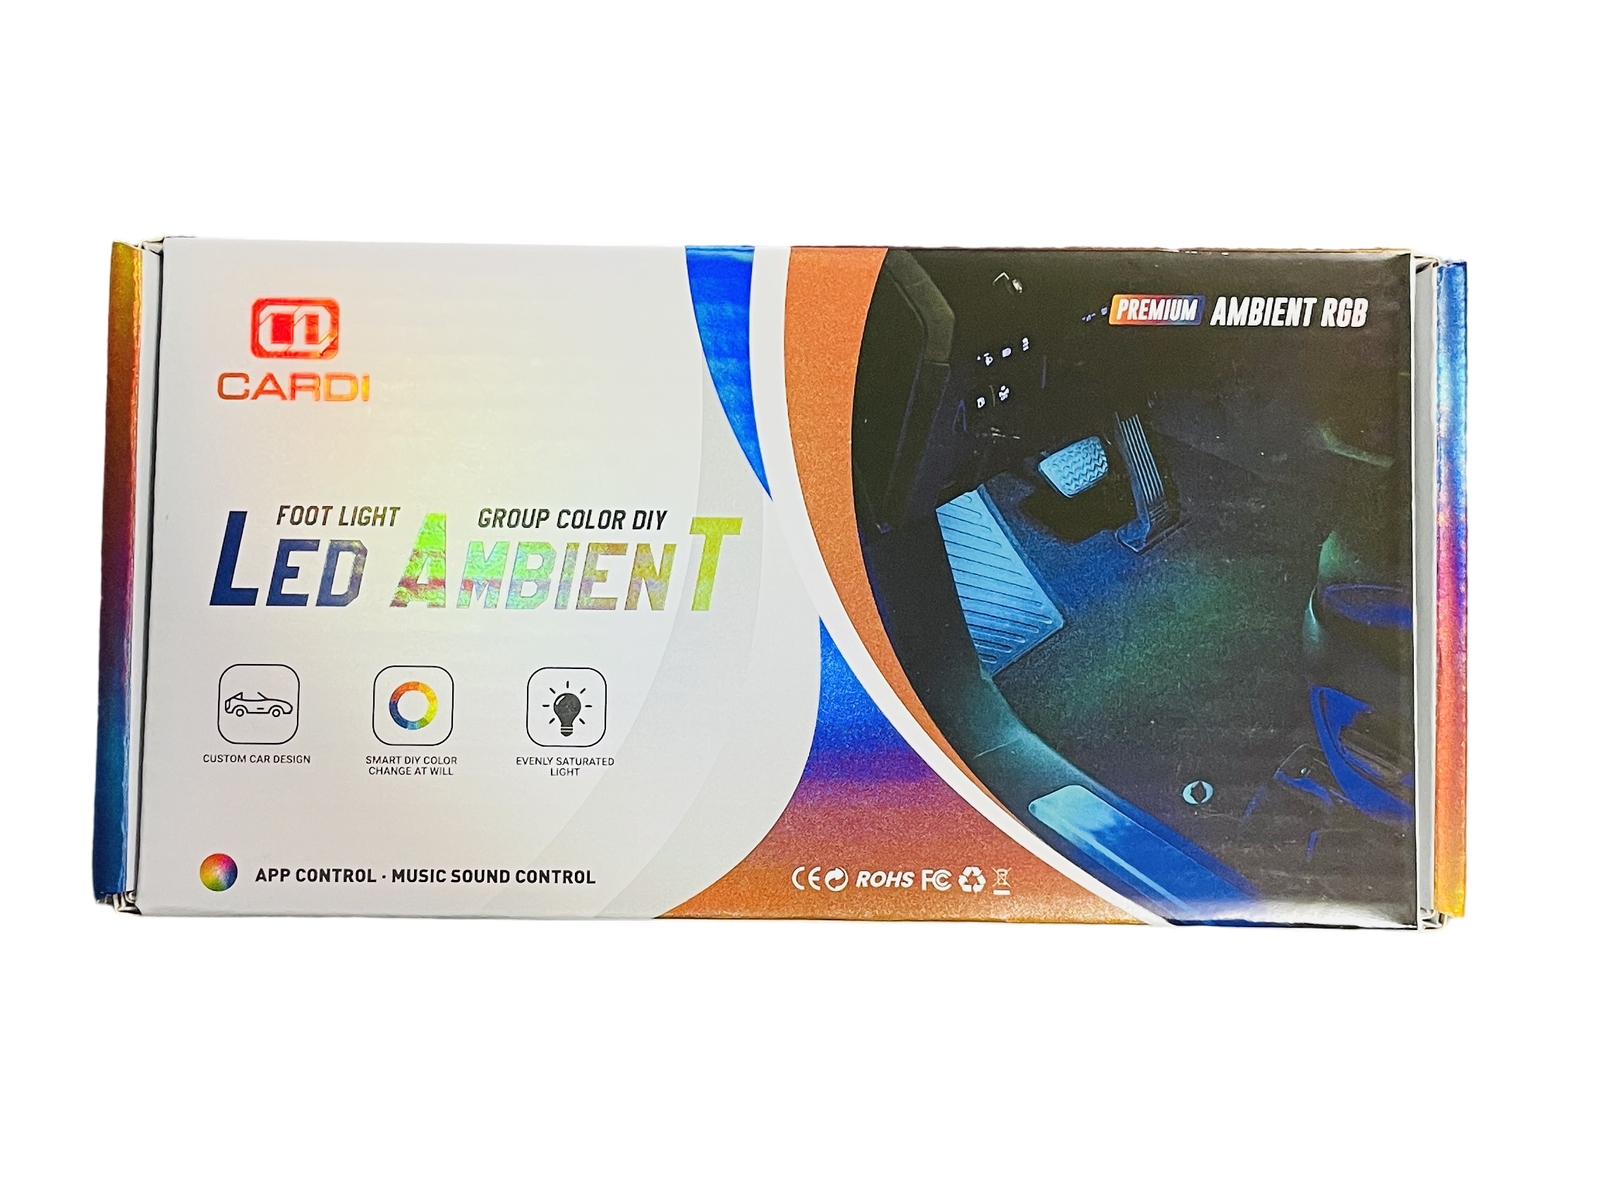 Cardi Card Atomospher Foot Lights with App Control